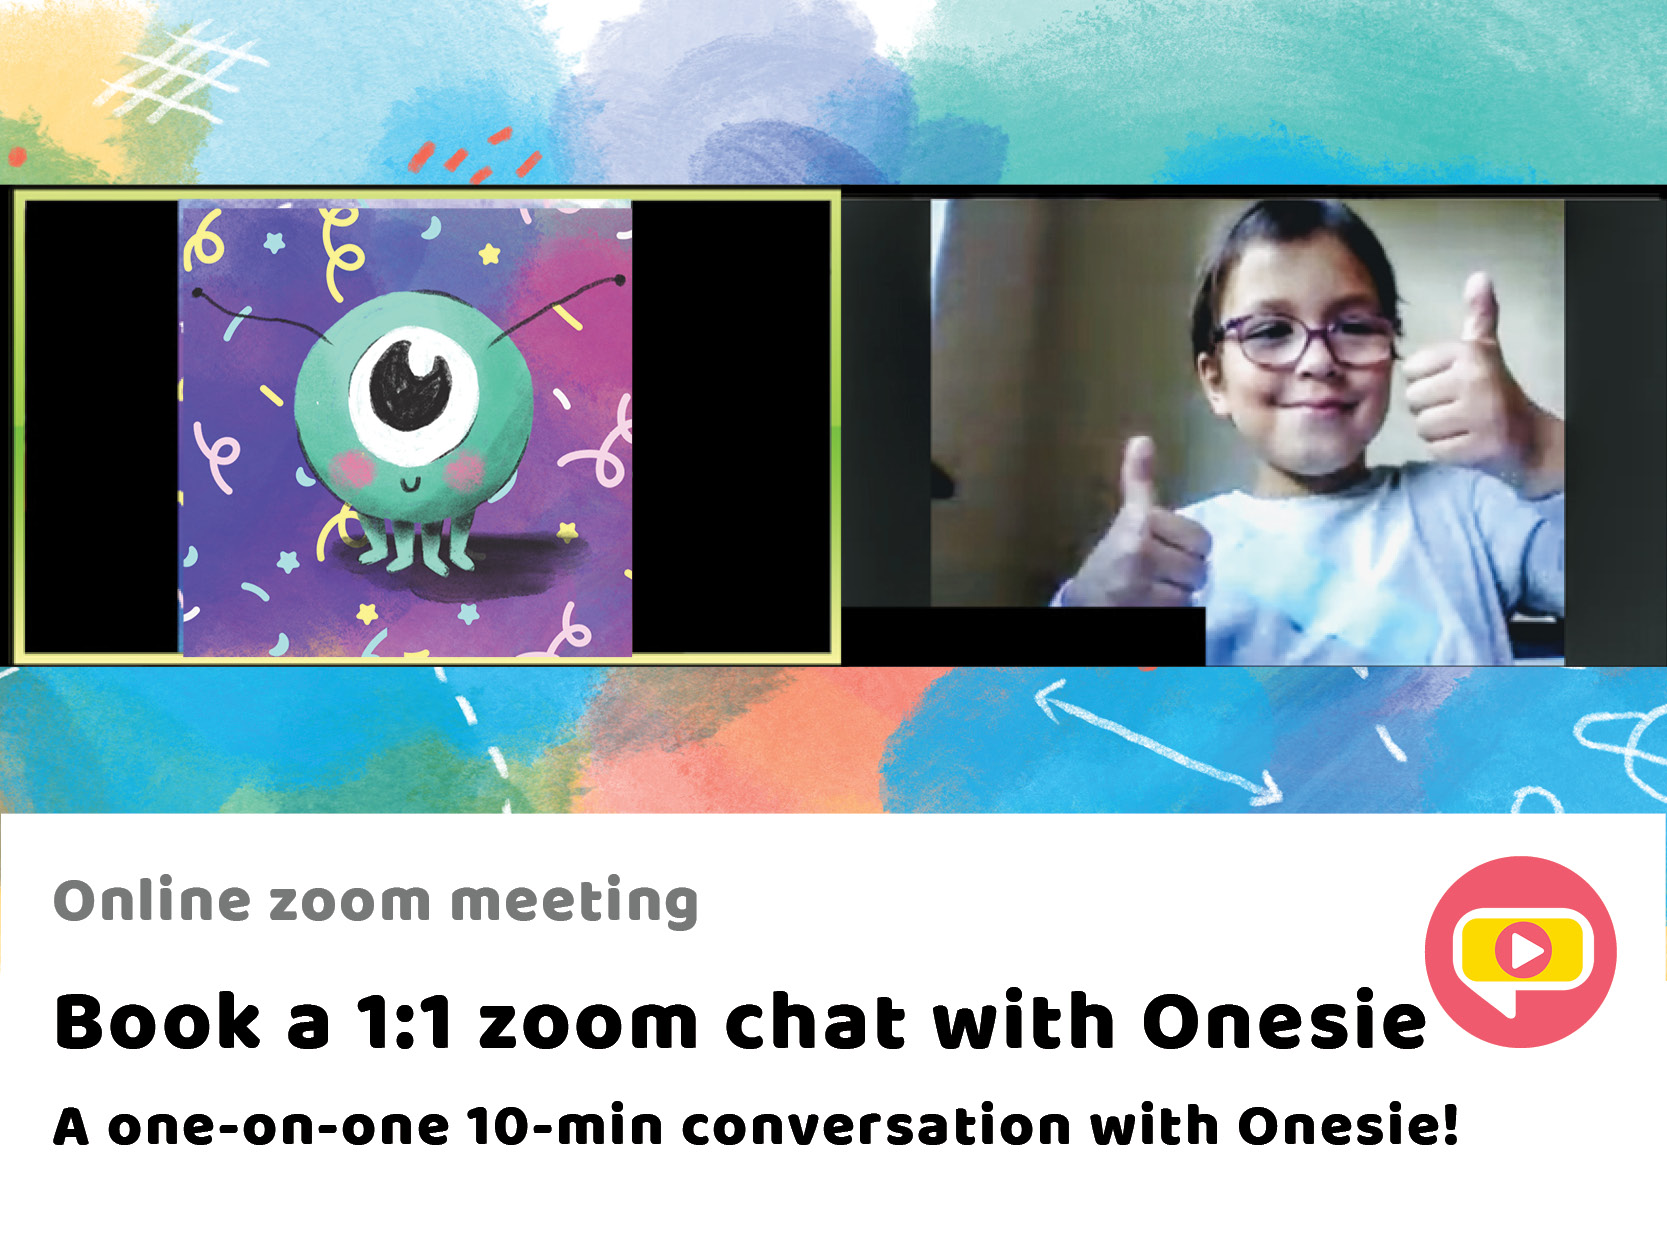 Book a 1:1 zoom chat with Onesie A one-on-one 10-min conversation with Onesie!